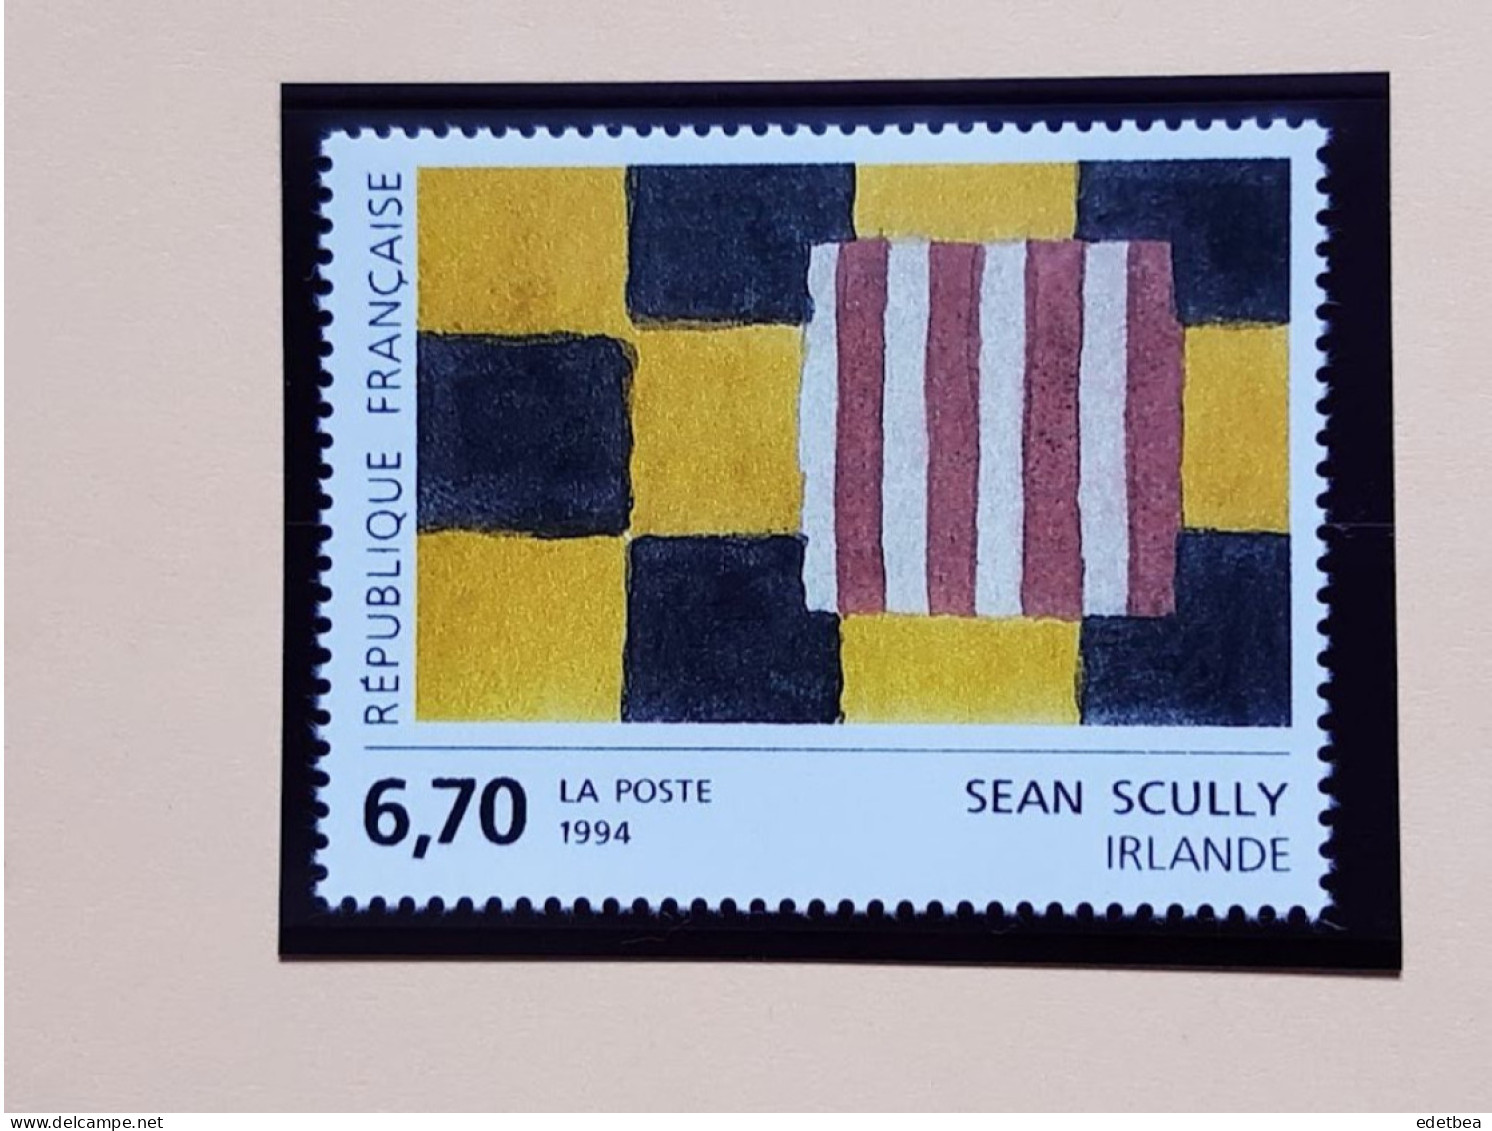 Timbre – France – 1994- N° 2858-  Oeuvre De Sean SCULLY : Oeuvre Originale -Etat : Neuf - Unused Stamps